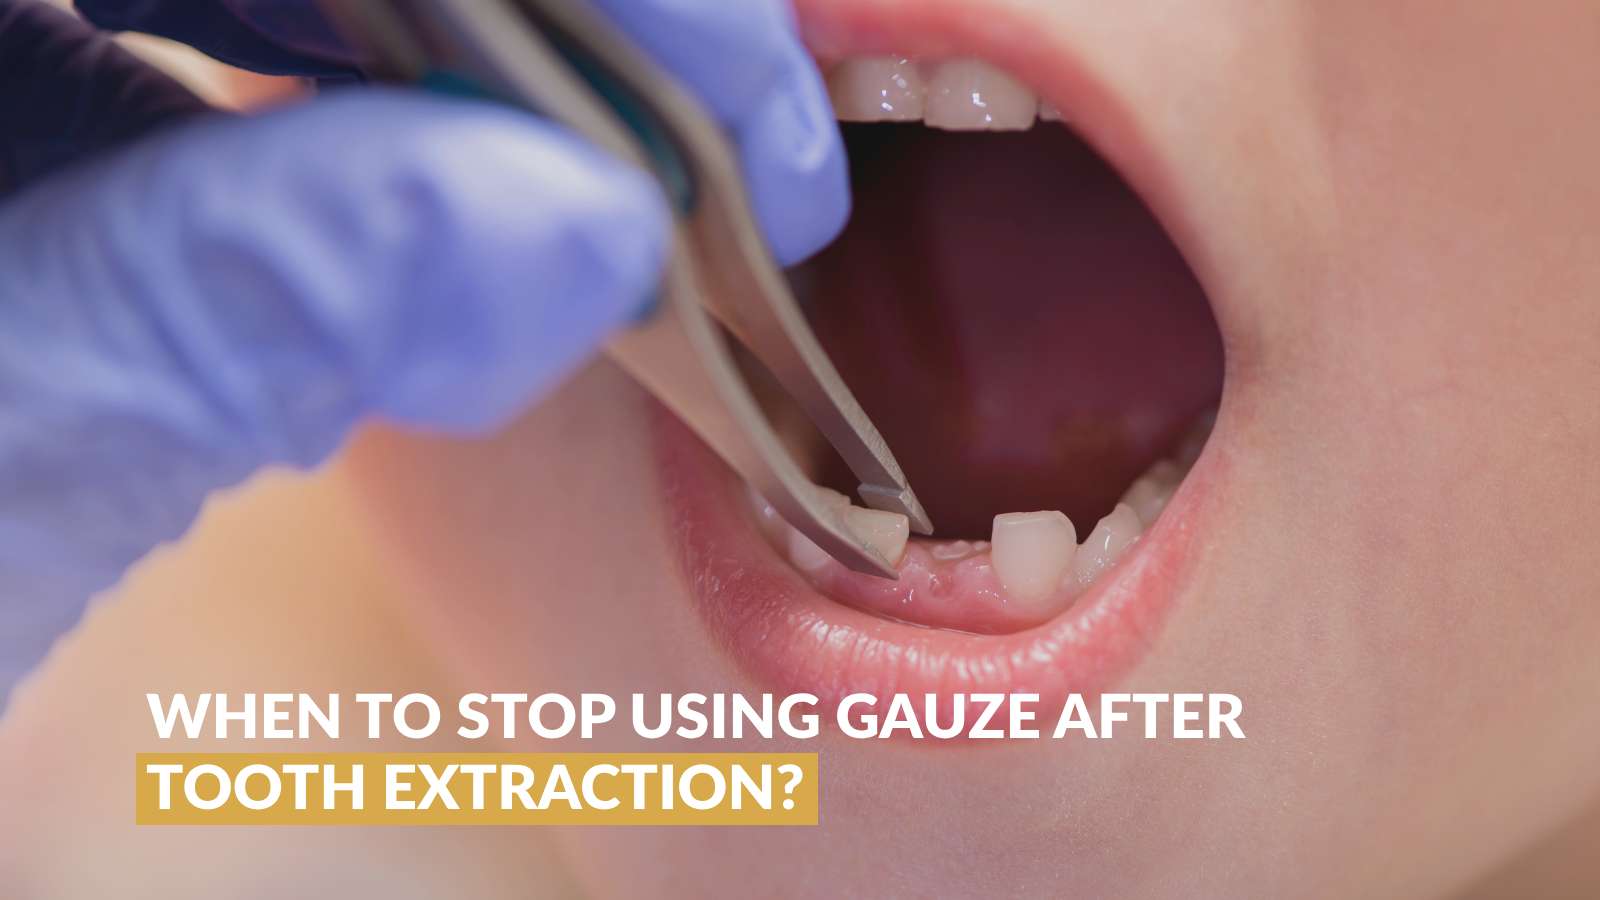 When to Stop Using Gauze After Tooth Extraction?